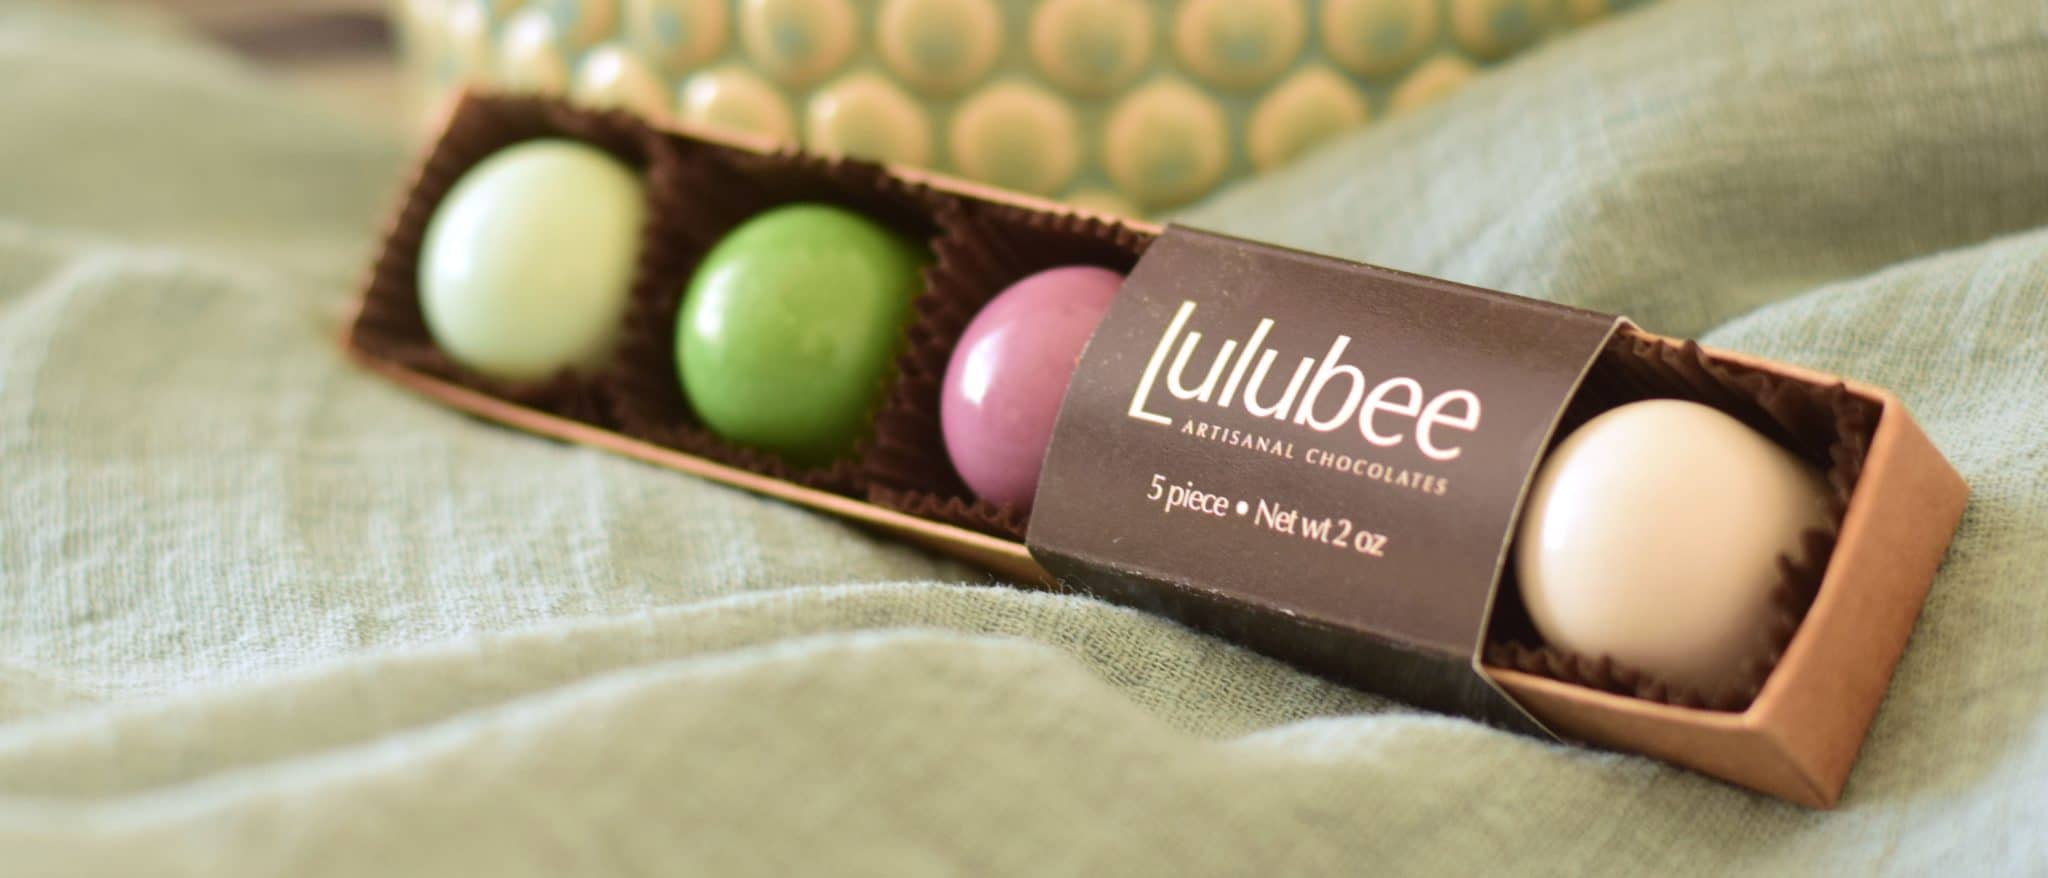 5 gourmet chocolate, pastel-colored truffles in a box that has a cigar band that reads Lulubee Artisanal Chocolates